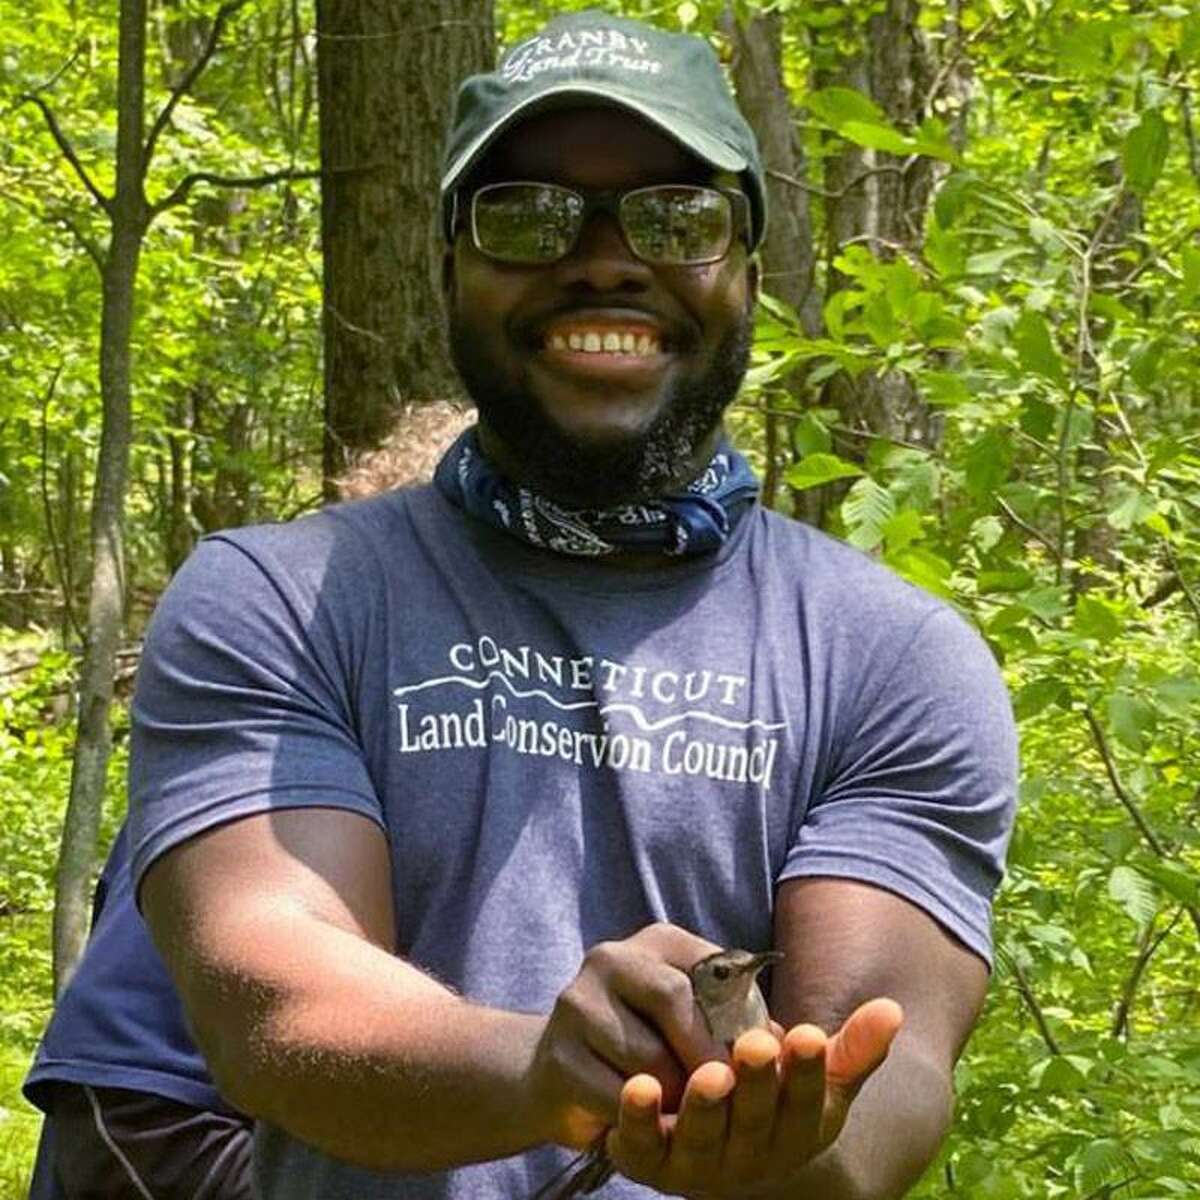 Yaw Darko, who moved to Hartford from Ghana at age 10, is passionate about preserving green spaces in Connecticut.